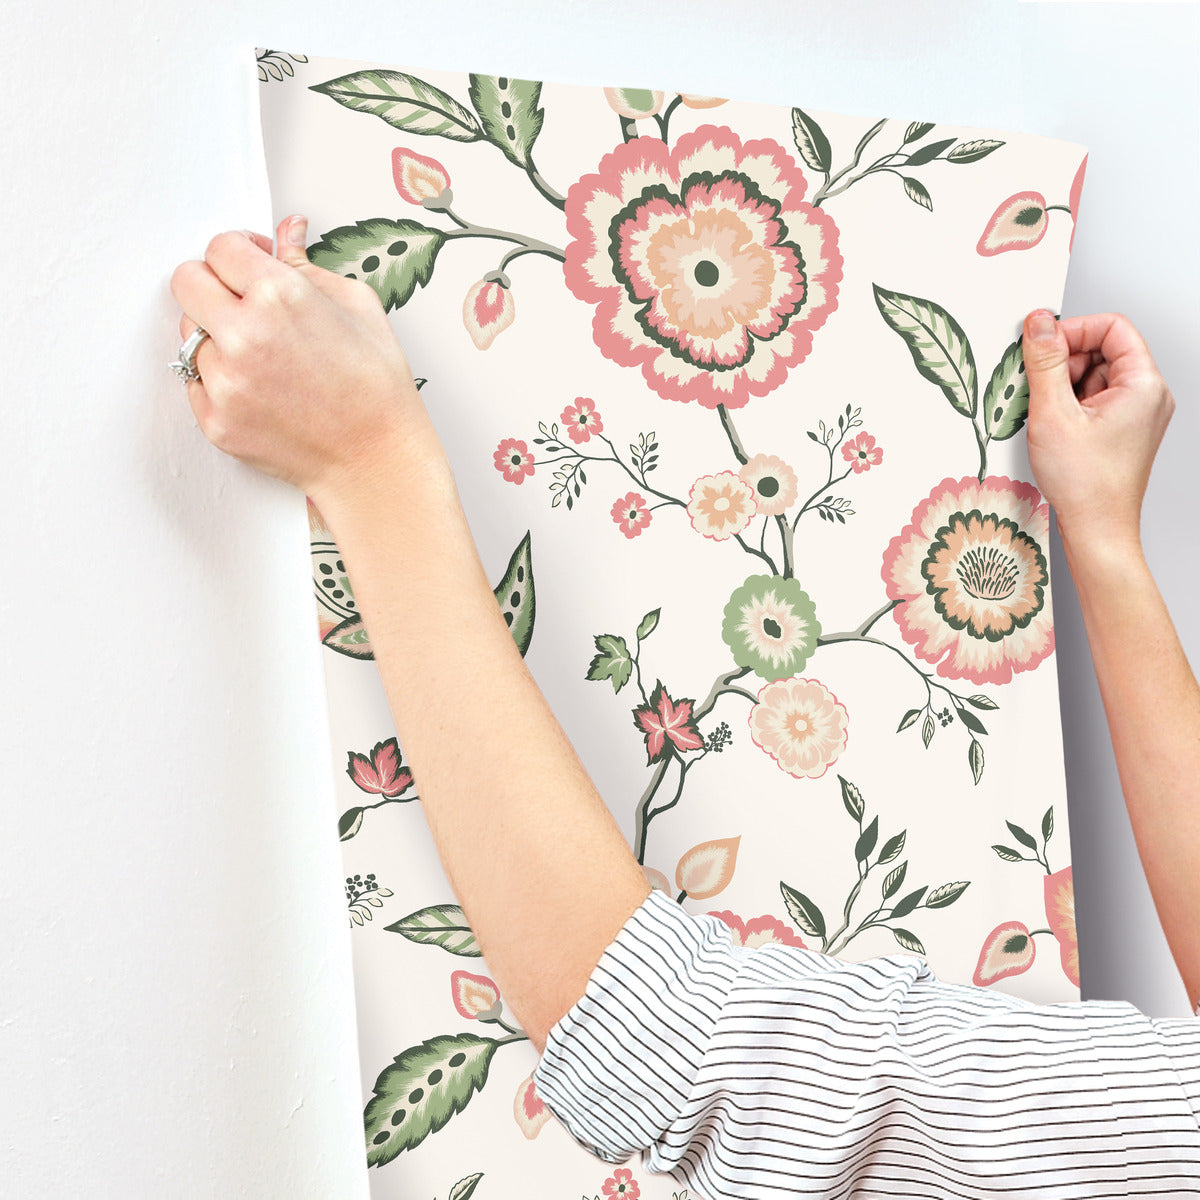 A person with a striped sleeve is applying York Wallcoverings' Dahlia Blooms Midnight/Multi Wallpaper Black, Pink (60 Sq.Ft.) to a light-colored wall. The wallpaper, featuring large flowers in shades of pink and peach with green leaves and stems, offers botanical elegance. The person's hands are smoothing out the paper, ensuring an easy installation and removal process.